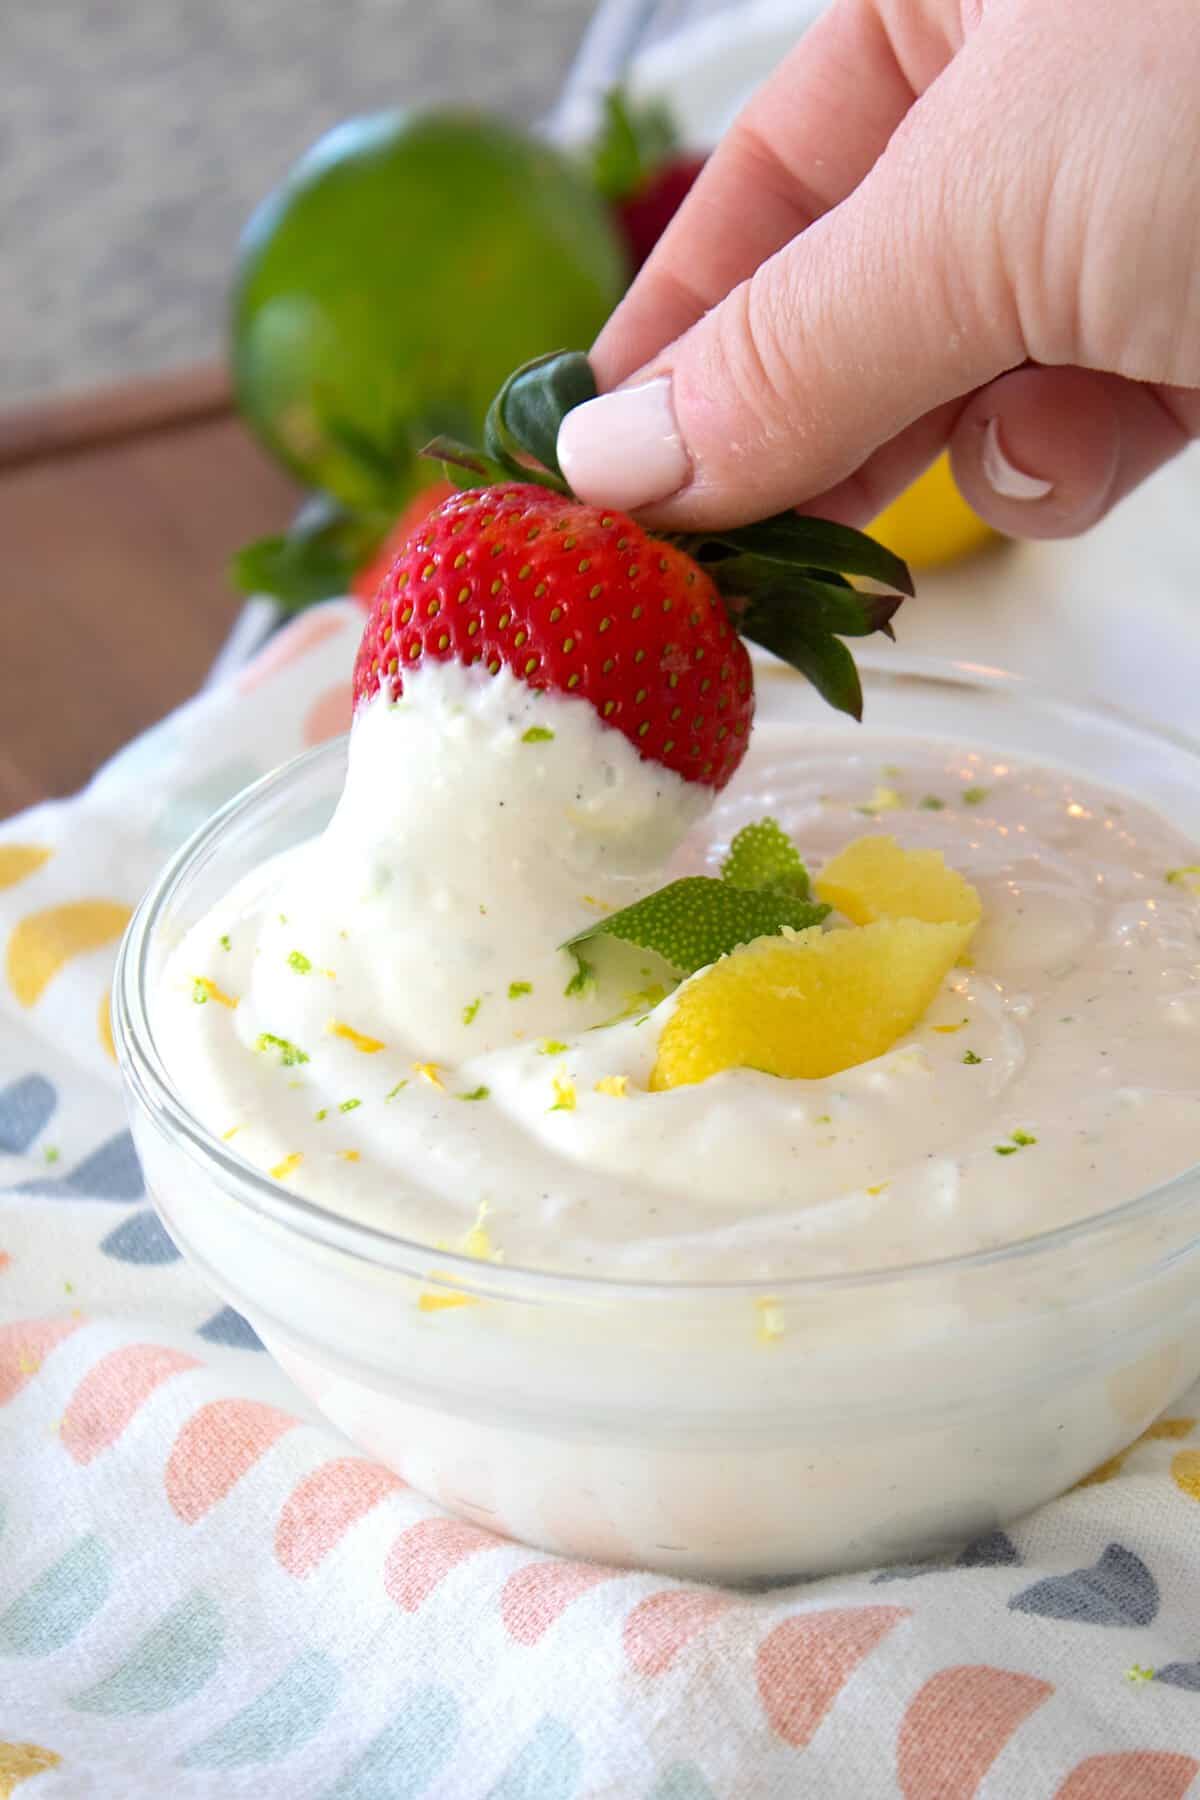 Dipping a strawberry in white fruit dip